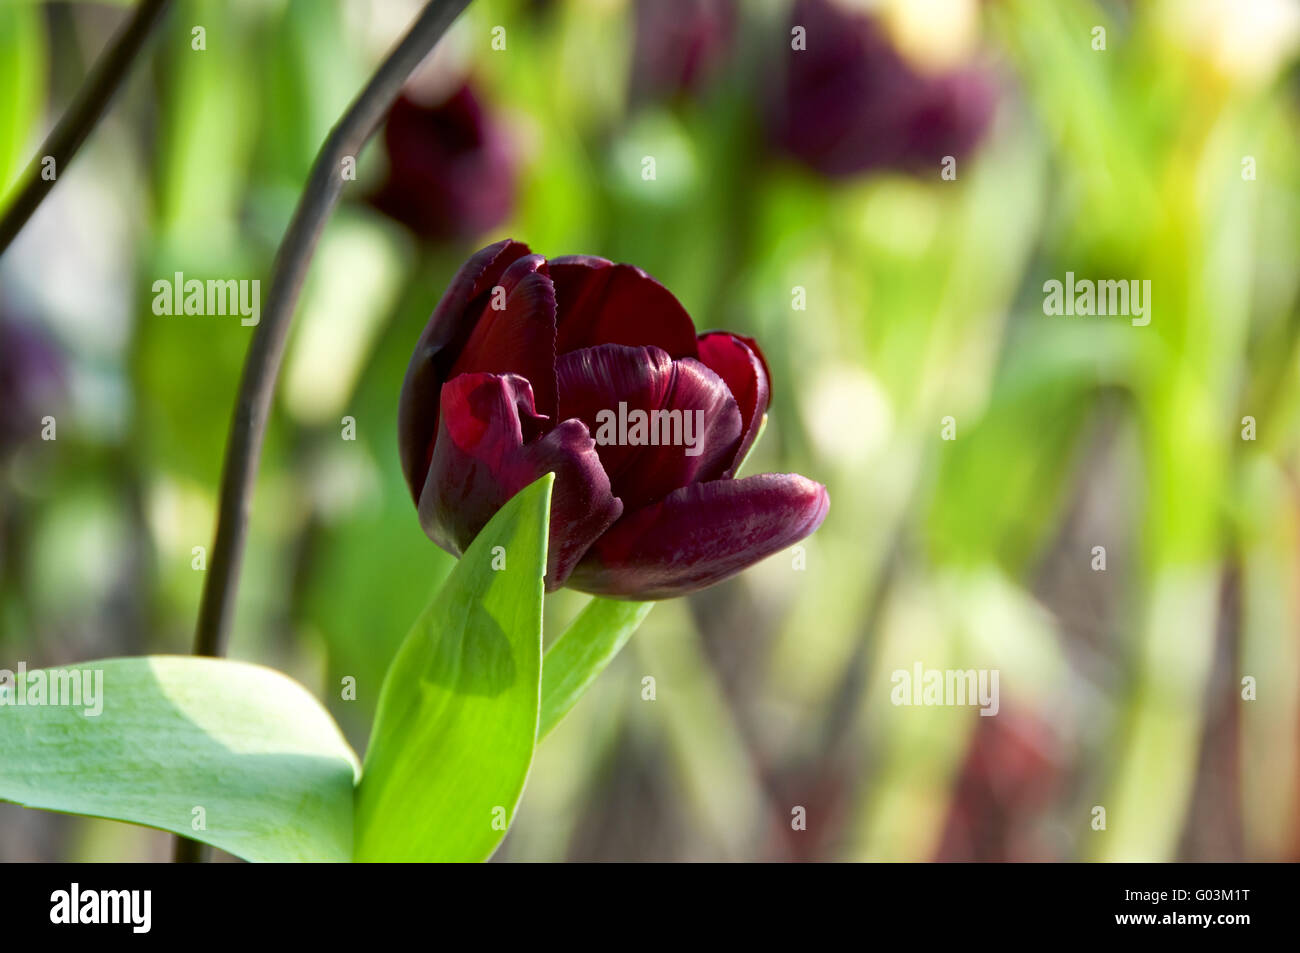 The close view of dark tulip over stalk and leafs Stock Photo